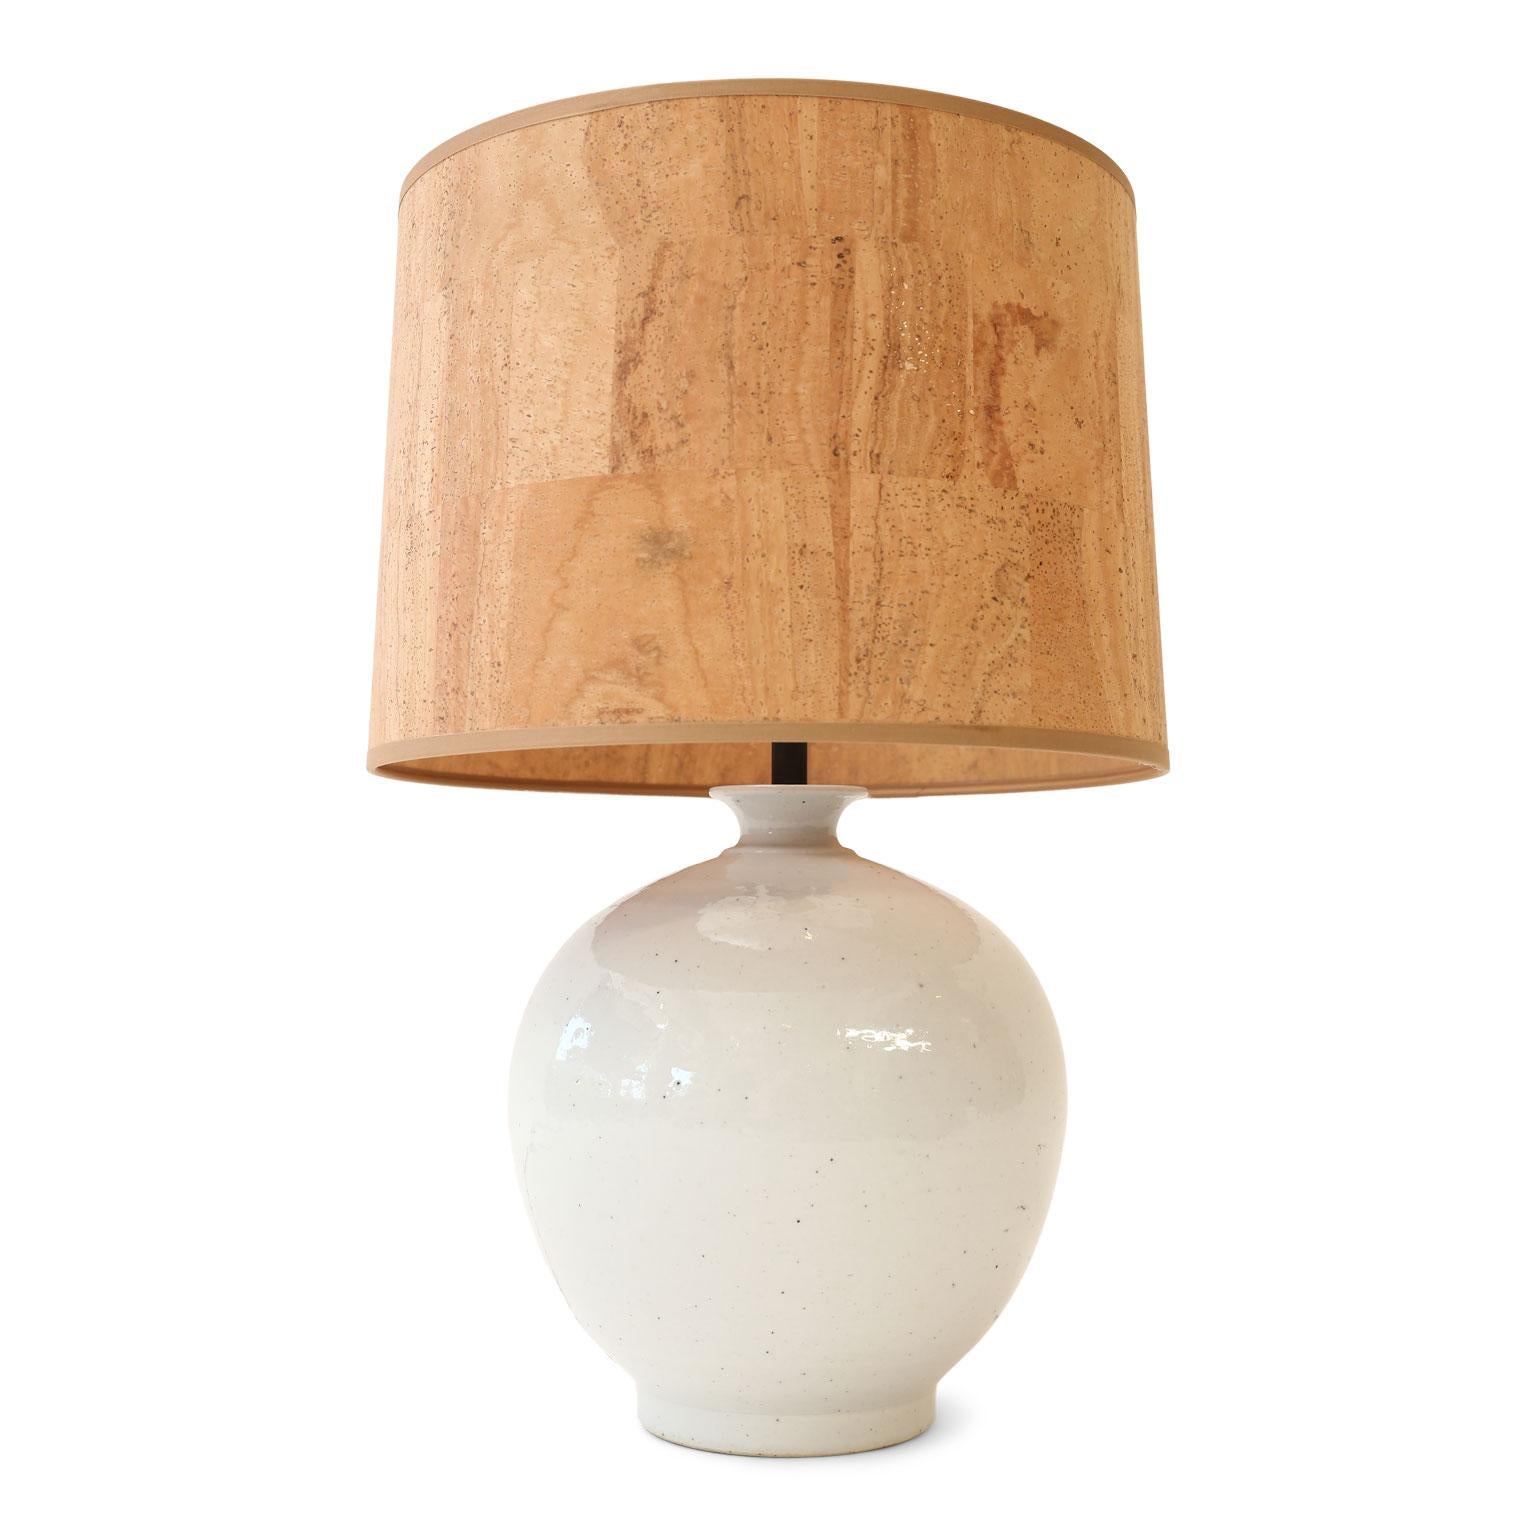 Glazed white ceramic table lamp from vintage Chinese vase. Newly wired for use within the USA using all UL listed parts. Includes cork shade (listed measurements include shade).